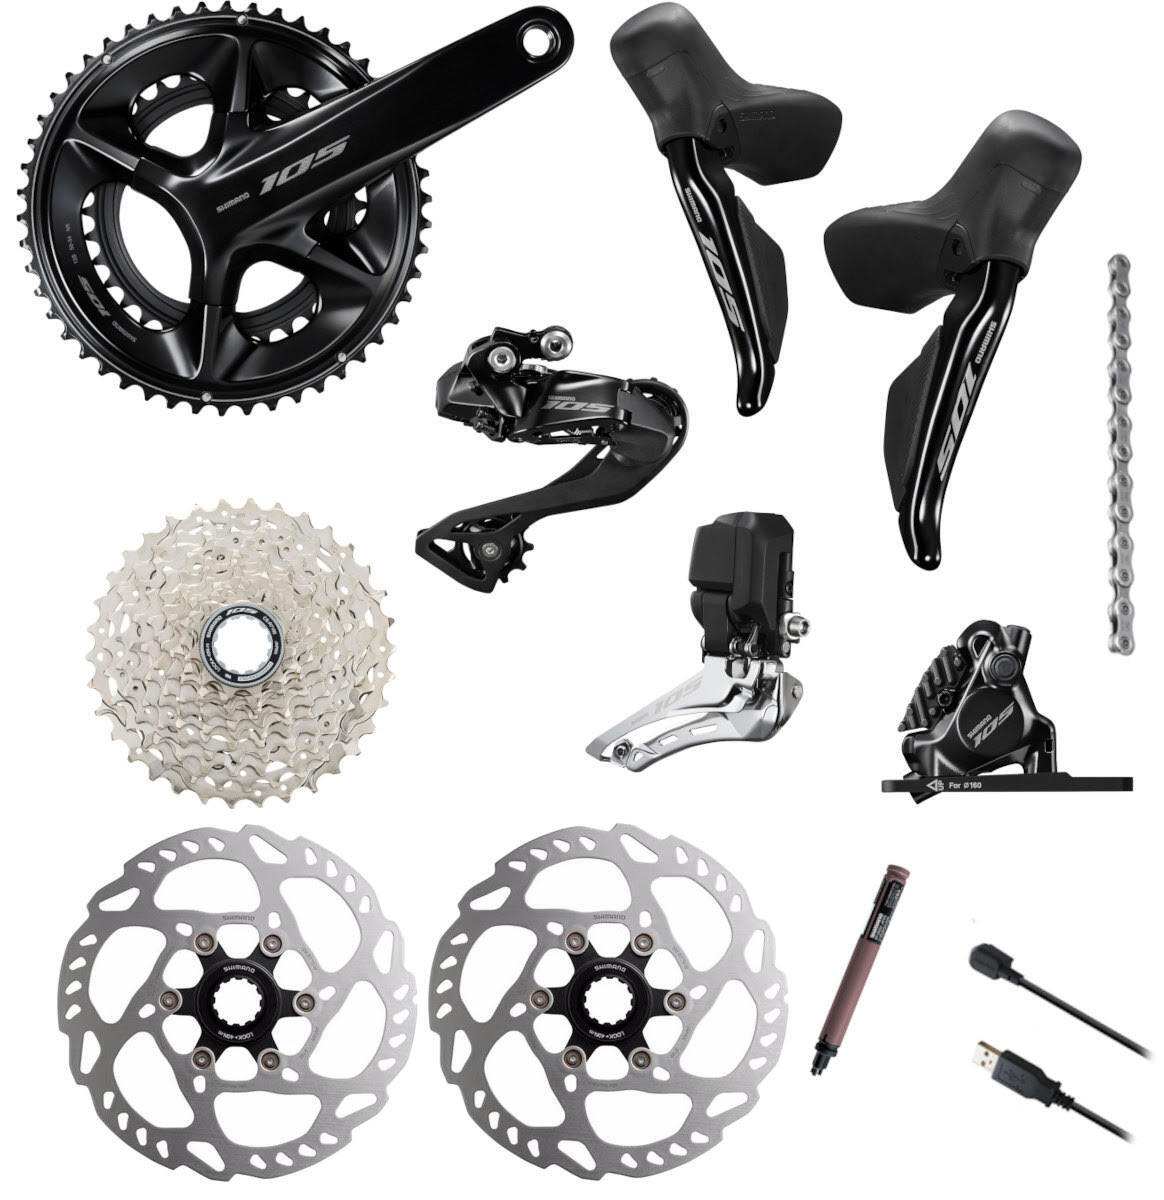 Shimano 105 R7170 12-Speed Di2 Disc Road Groupset